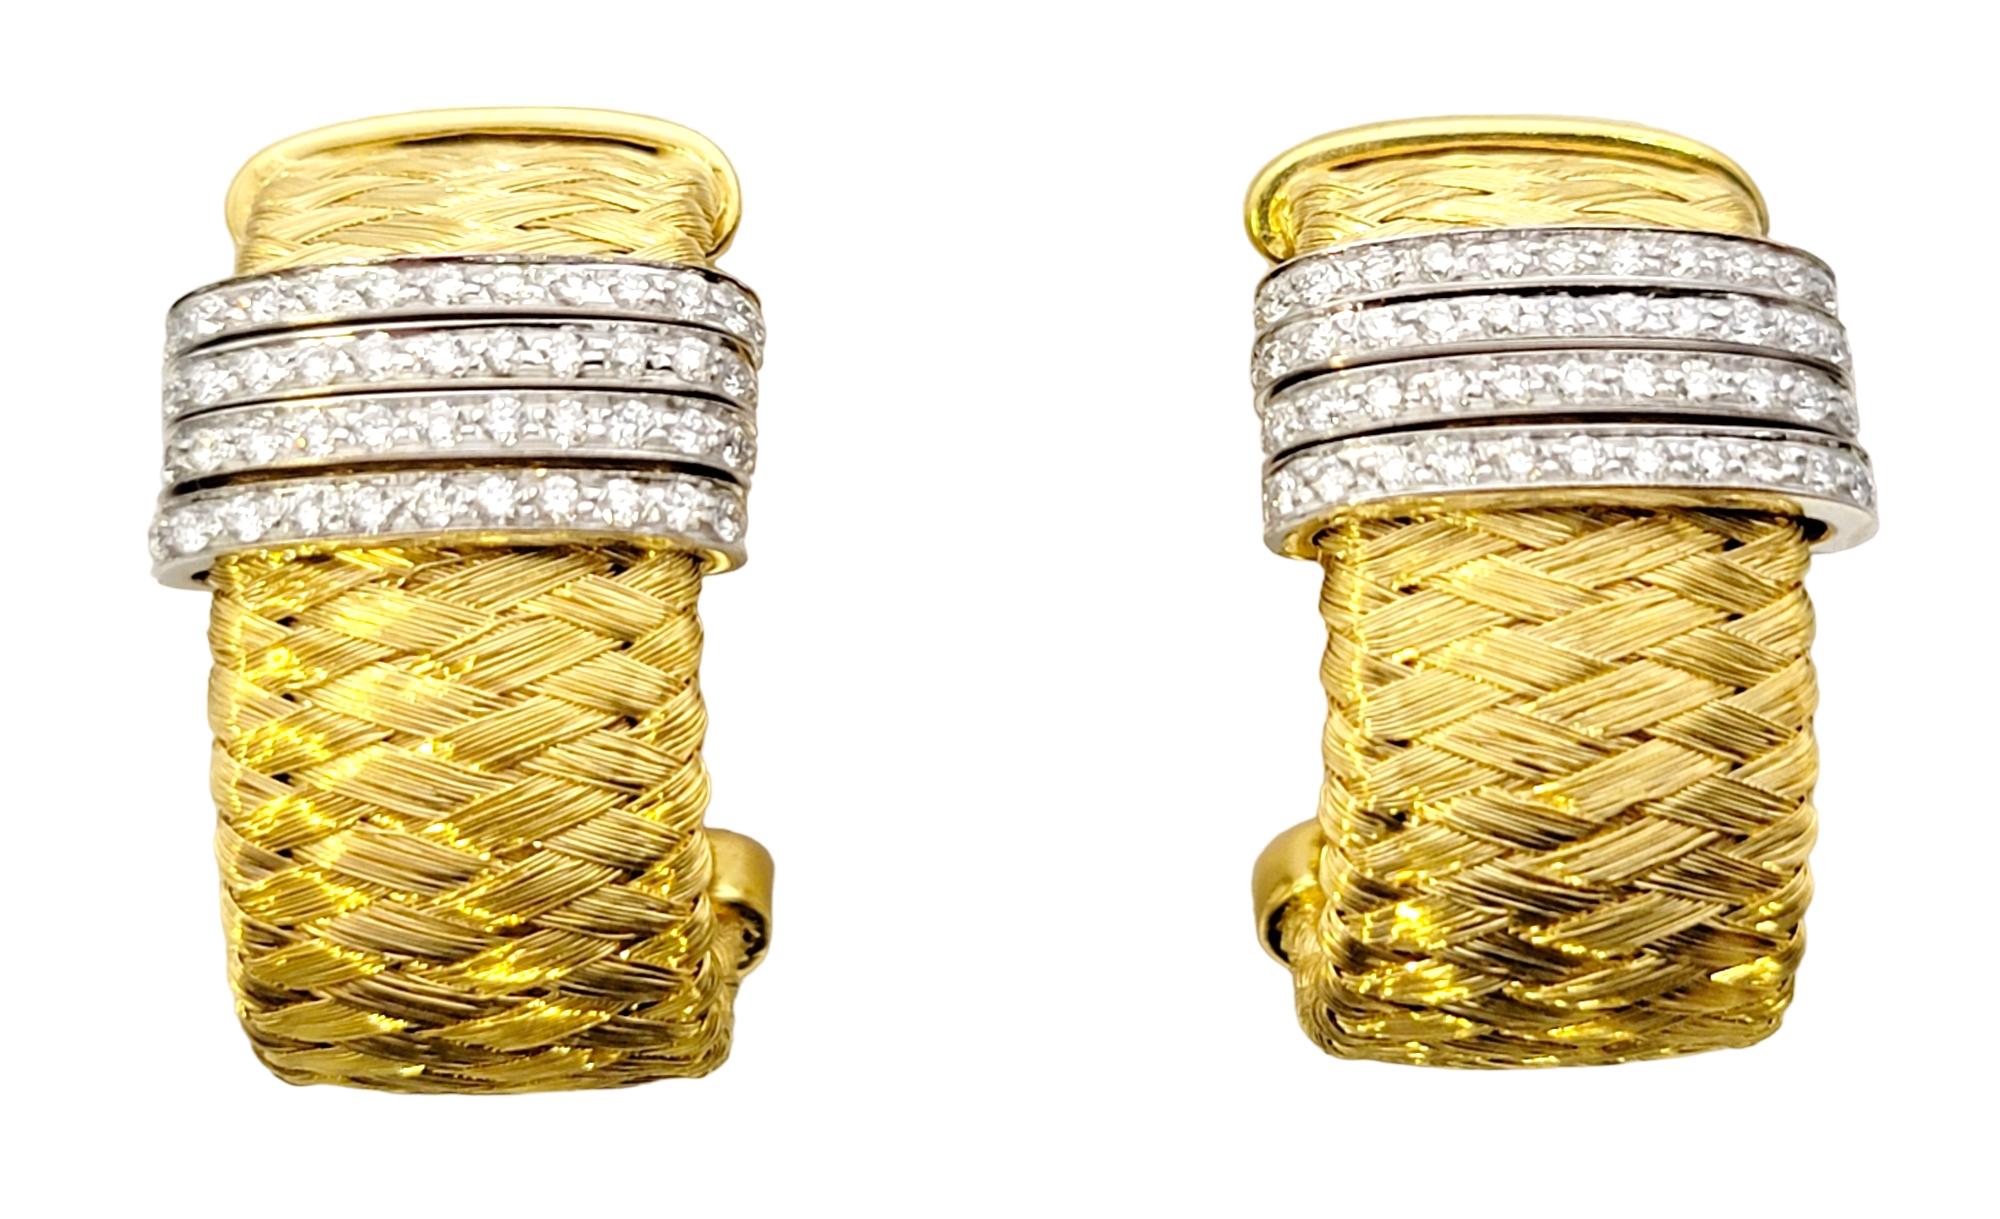 Simple yet stunning 18 karat gold and pave diamond half hoop earring by jewelry designer, Roberto Coin. The striking contrast of the icy white diamonds against the golden hue of the metal allows the diamonds to really pop. The rounded shape gently